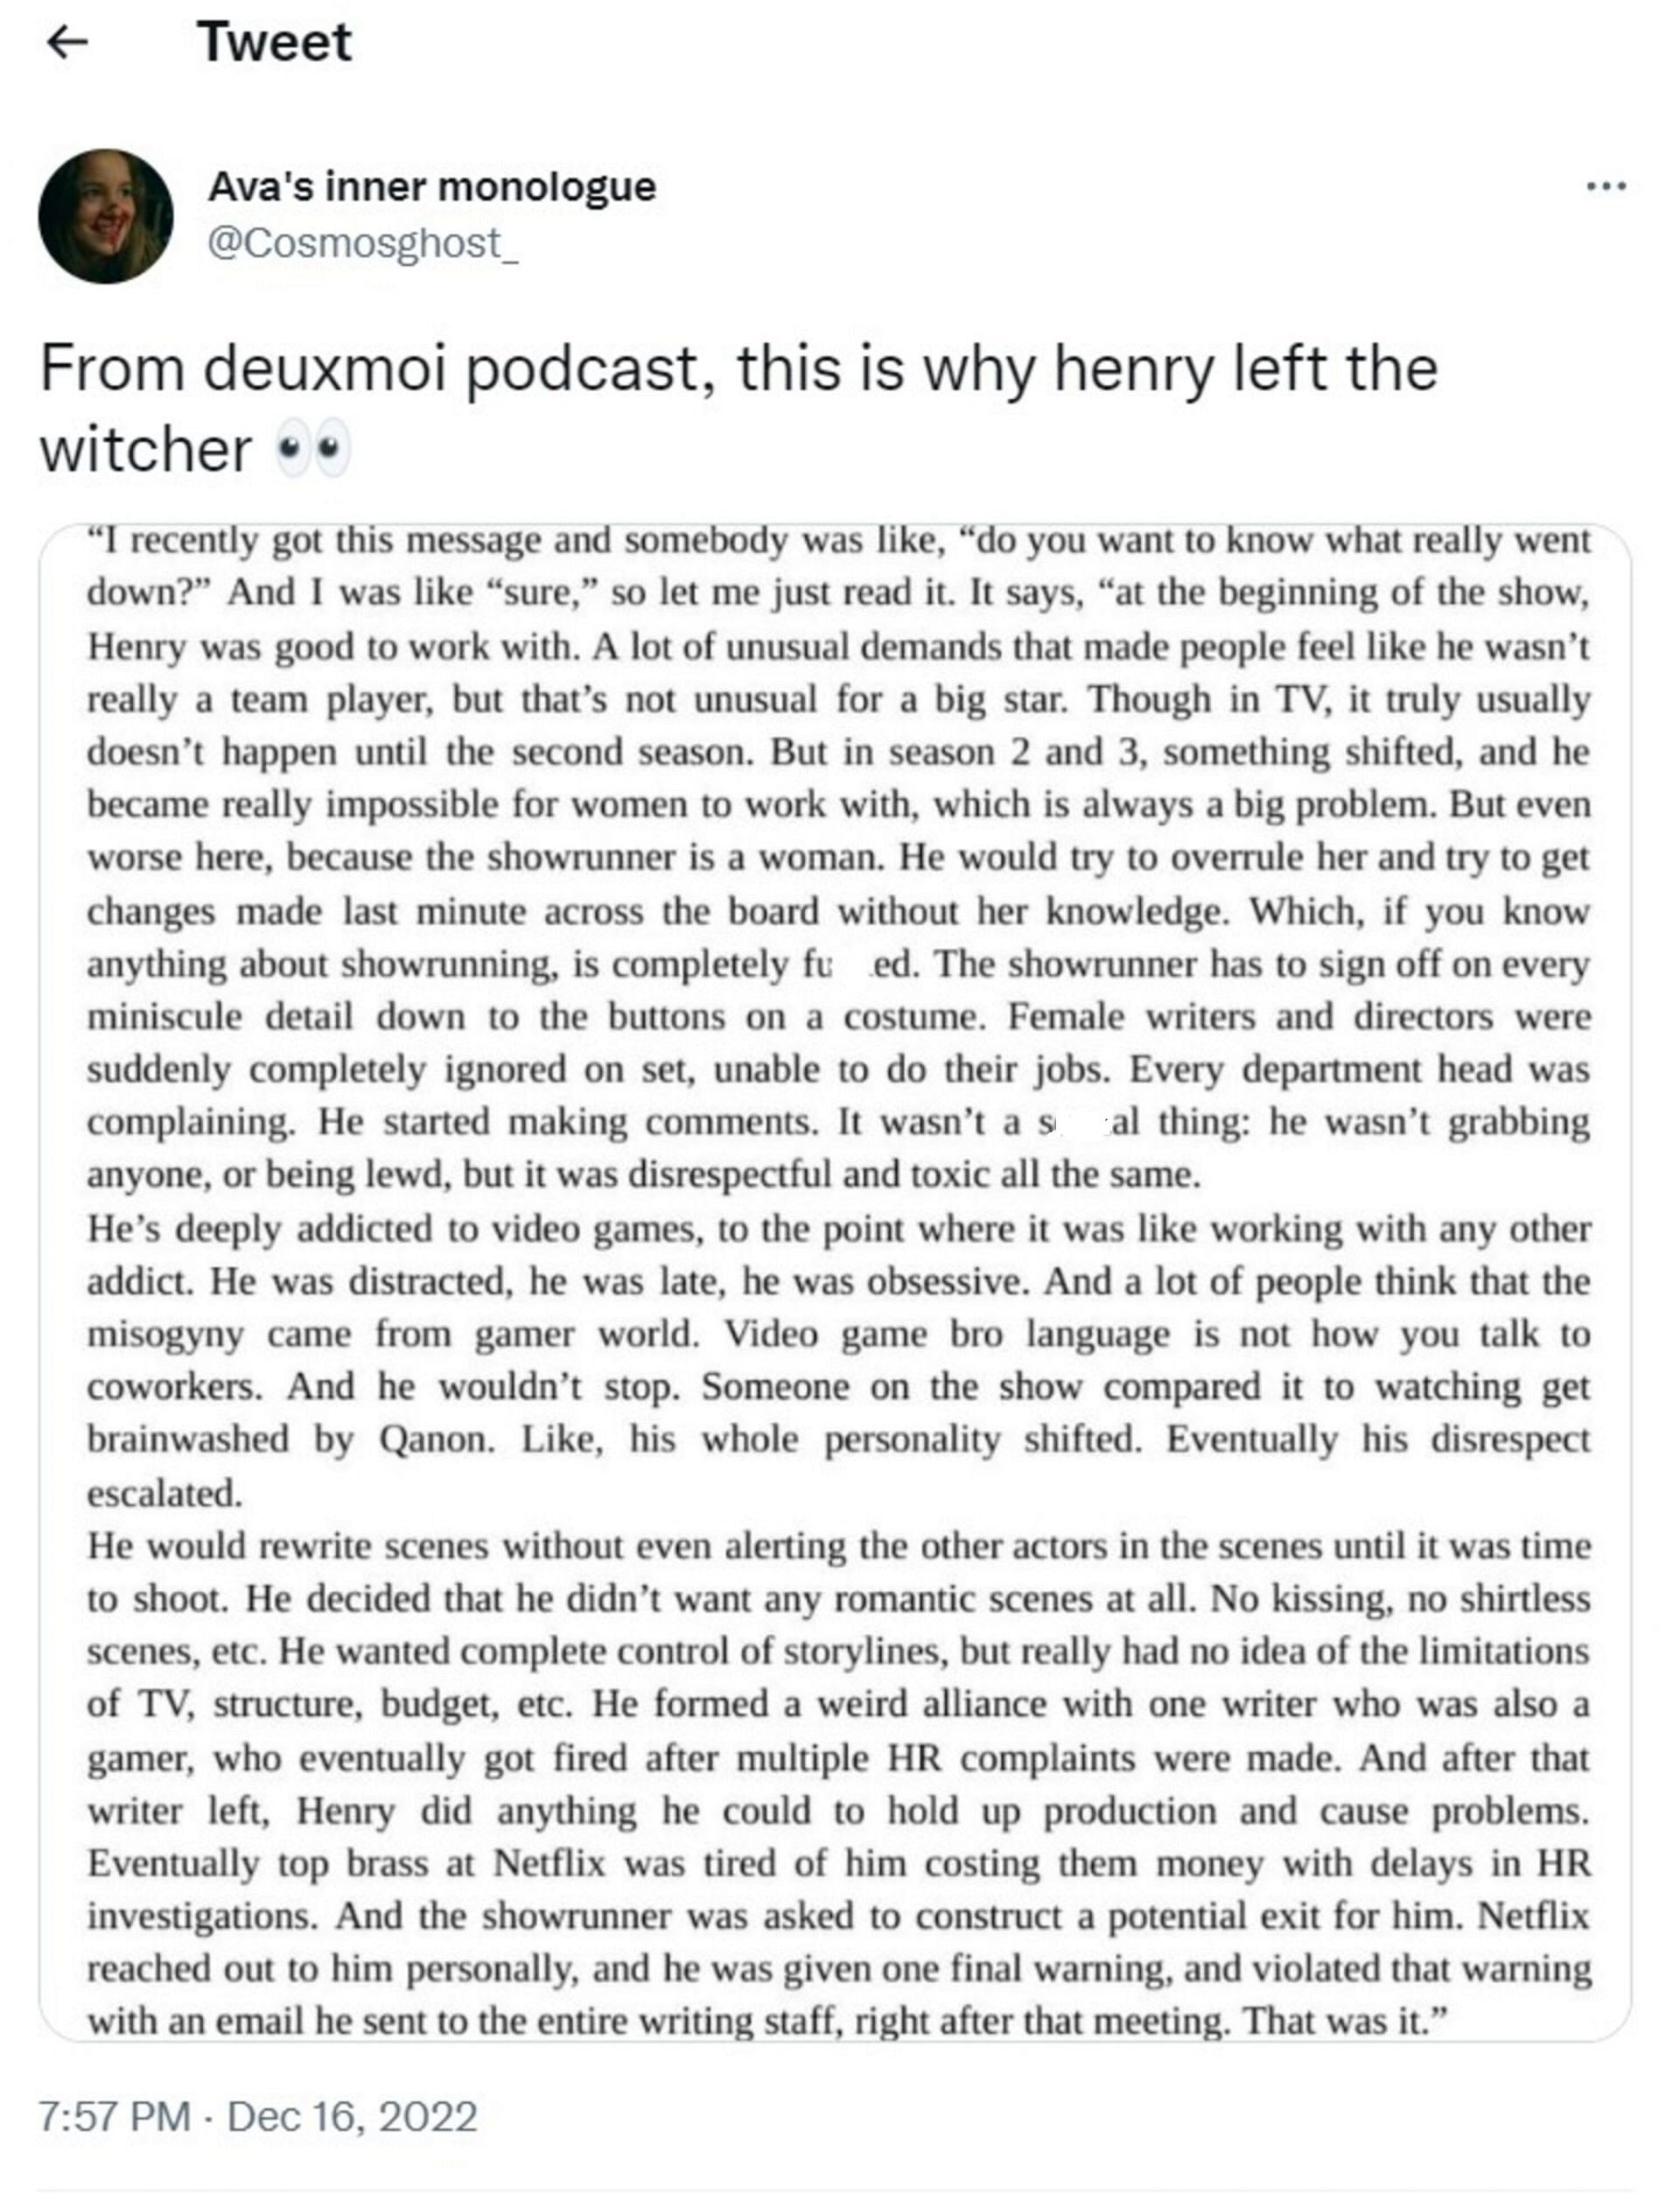 A transcript of what was said about Henry Cavill on the podcast (Image via Twitter/@cosmosghost_)